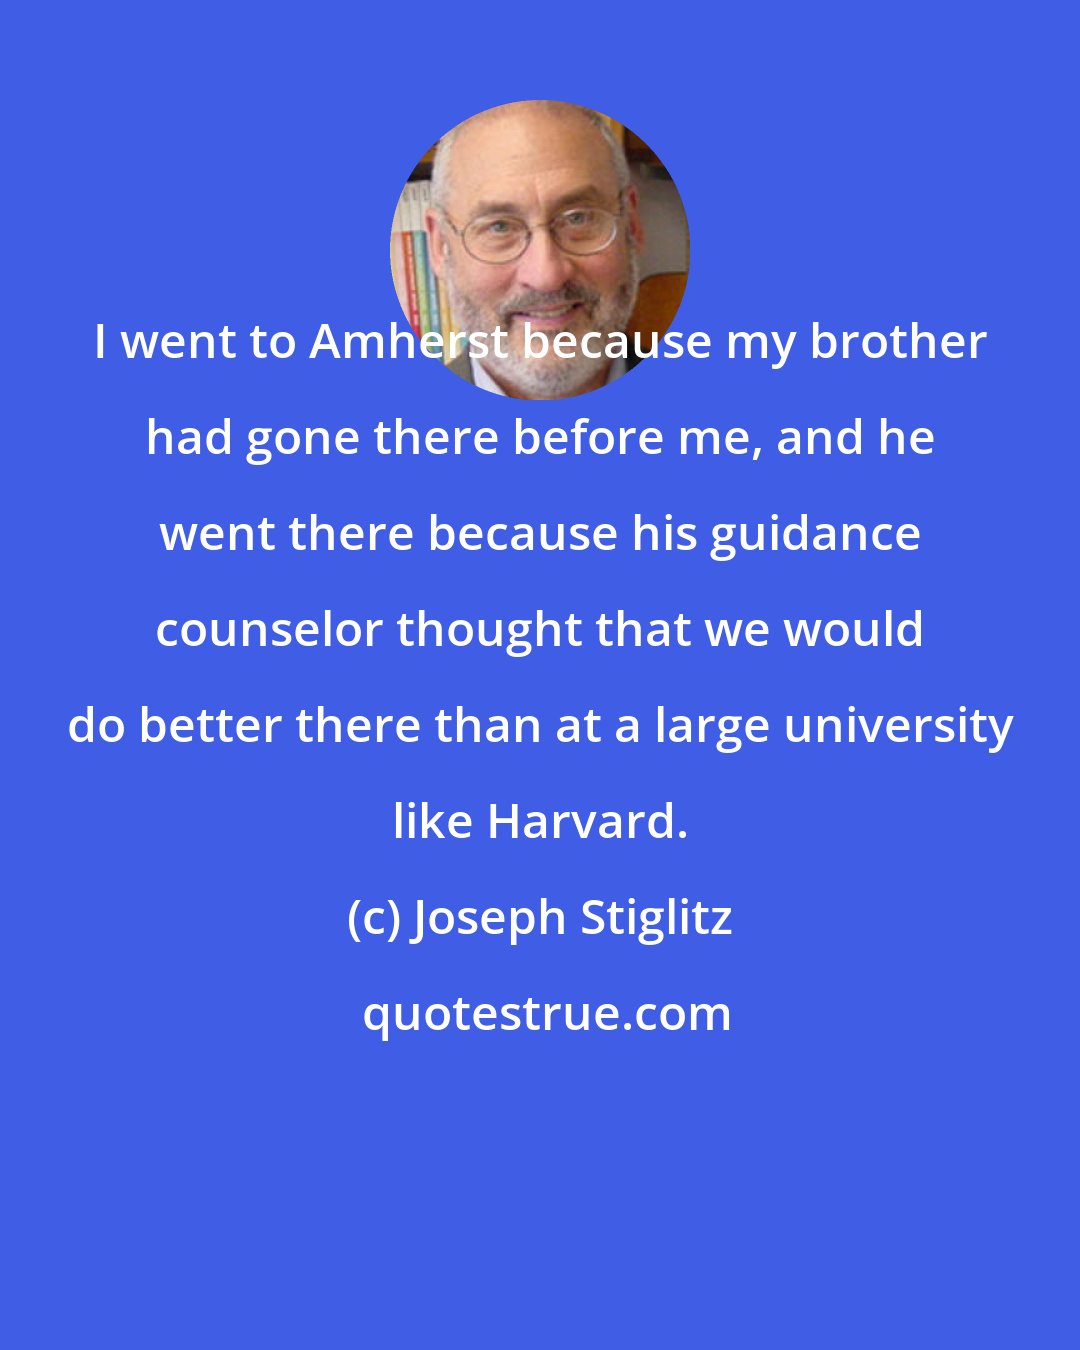 Joseph Stiglitz: I went to Amherst because my brother had gone there before me, and he went there because his guidance counselor thought that we would do better there than at a large university like Harvard.